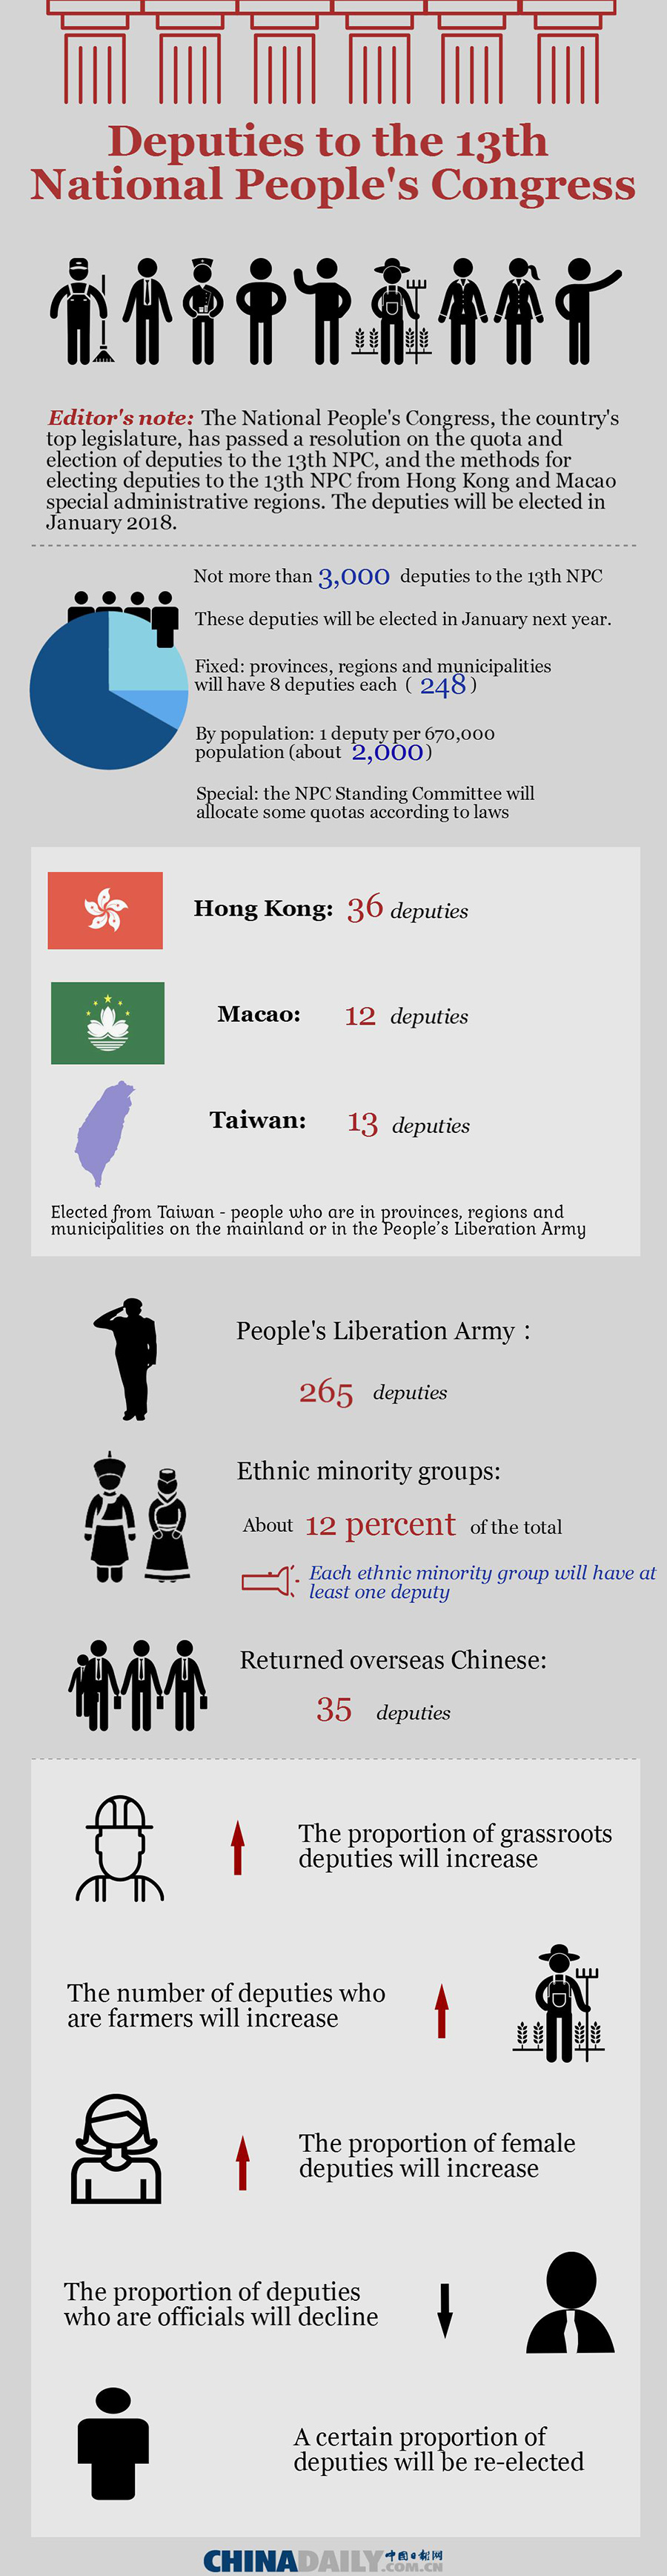 Infographic: Deputies to the 13th National People's Congress